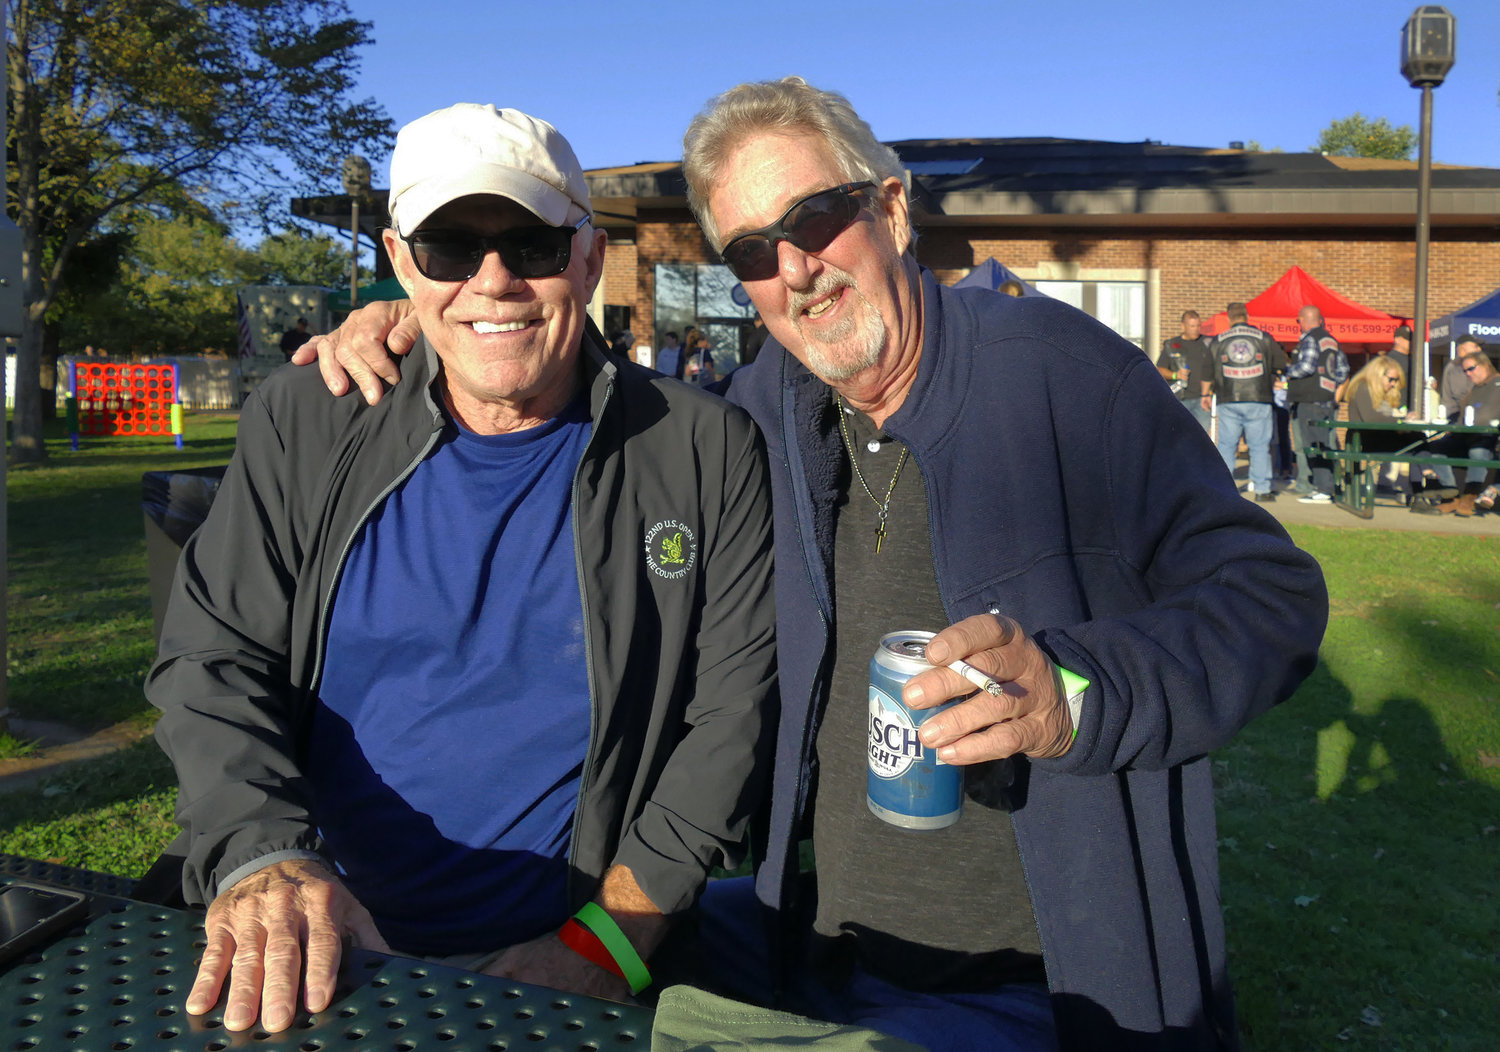 John Derenches and Tom McGrane enjoy the Wounded Warriors event on Saturday.